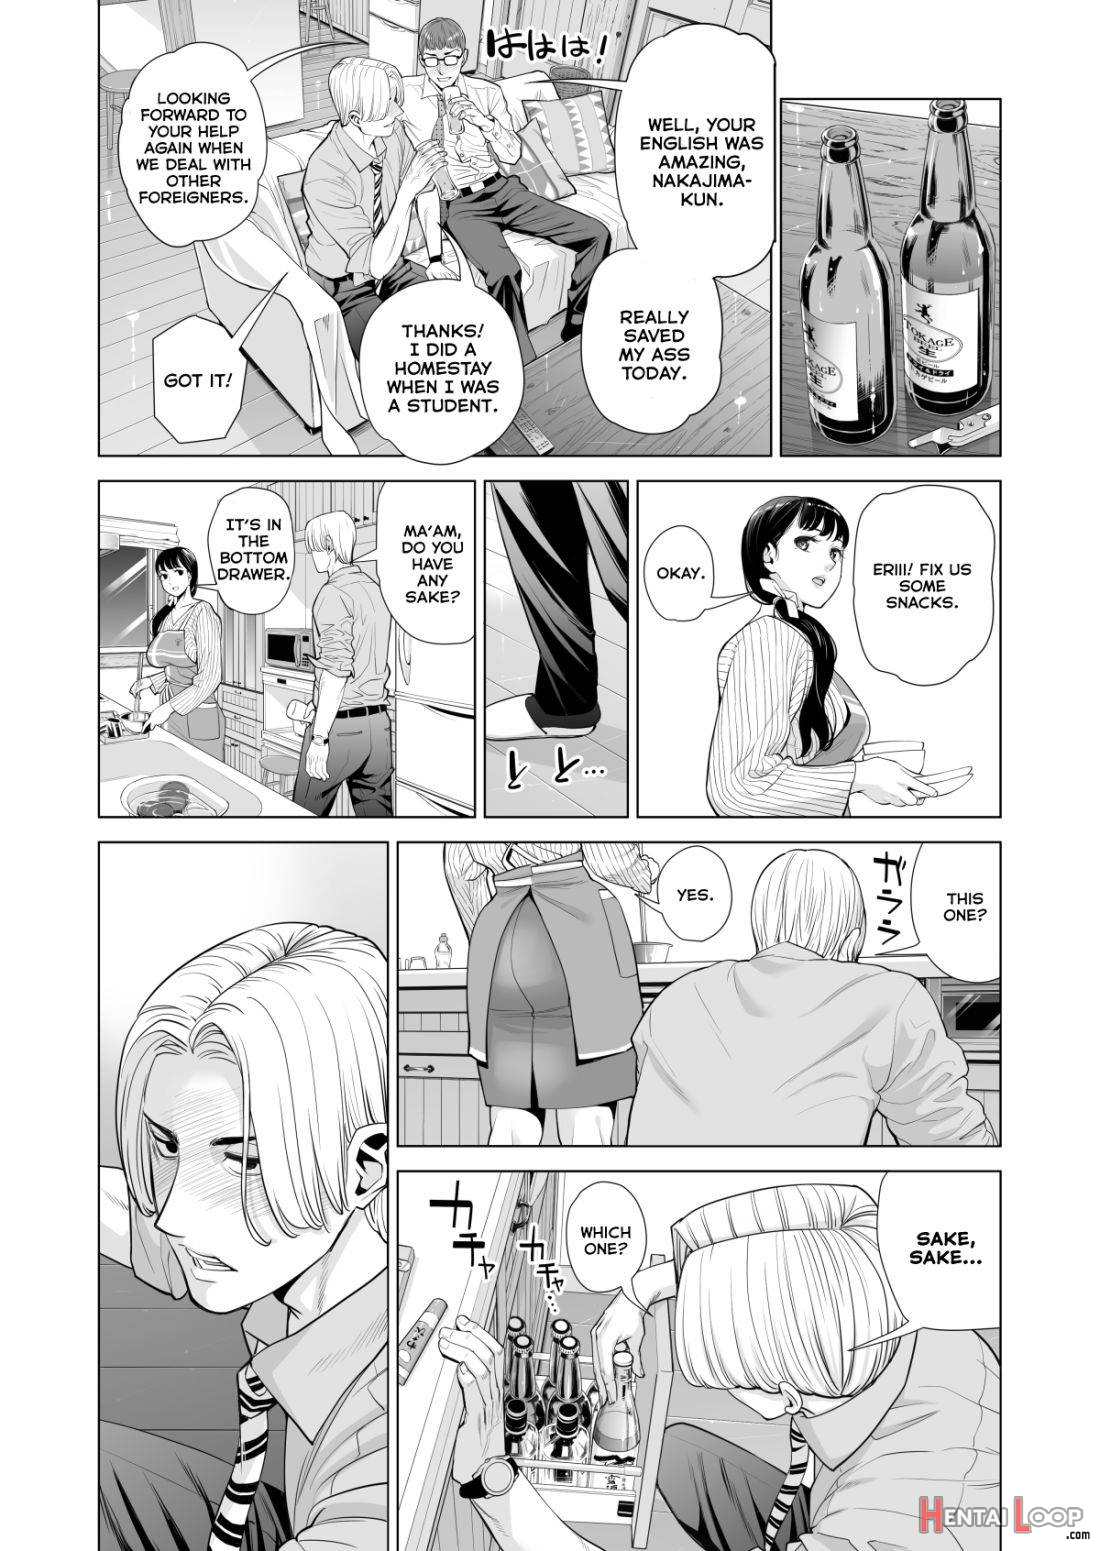 Tsukiyo no Midare Zake (Zenpen) Moonlit Intoxication ~ A Housewife Stolen by a Coworker Besides her Blackout Drunk Husband ~ Chapter 1 page 22